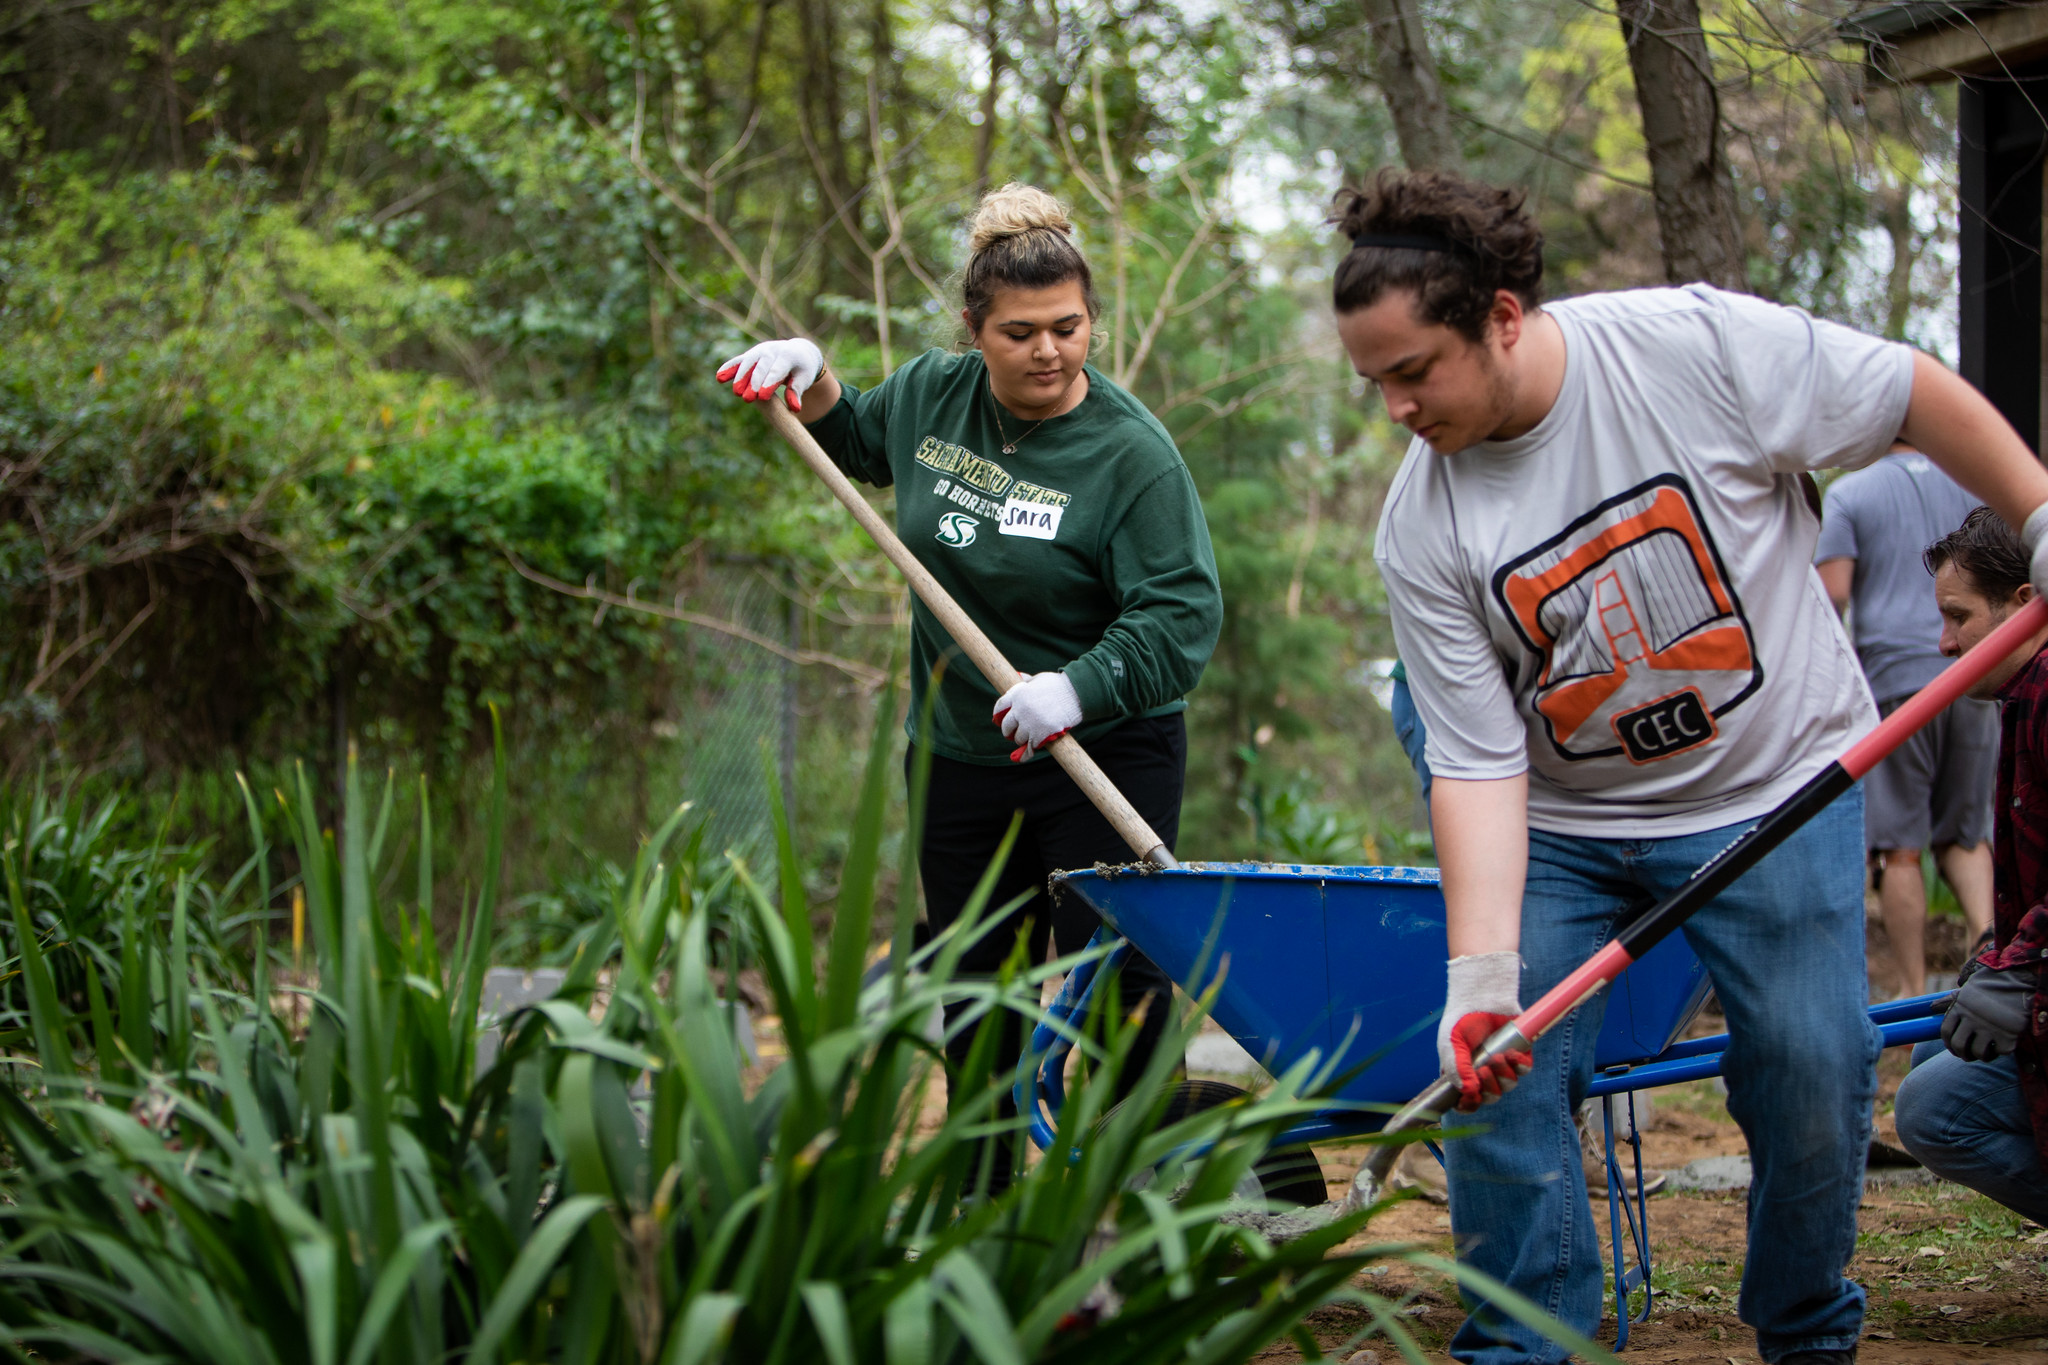 Two students holding shovels, standing near a wheelbarrow, performing landscaping work near a bush